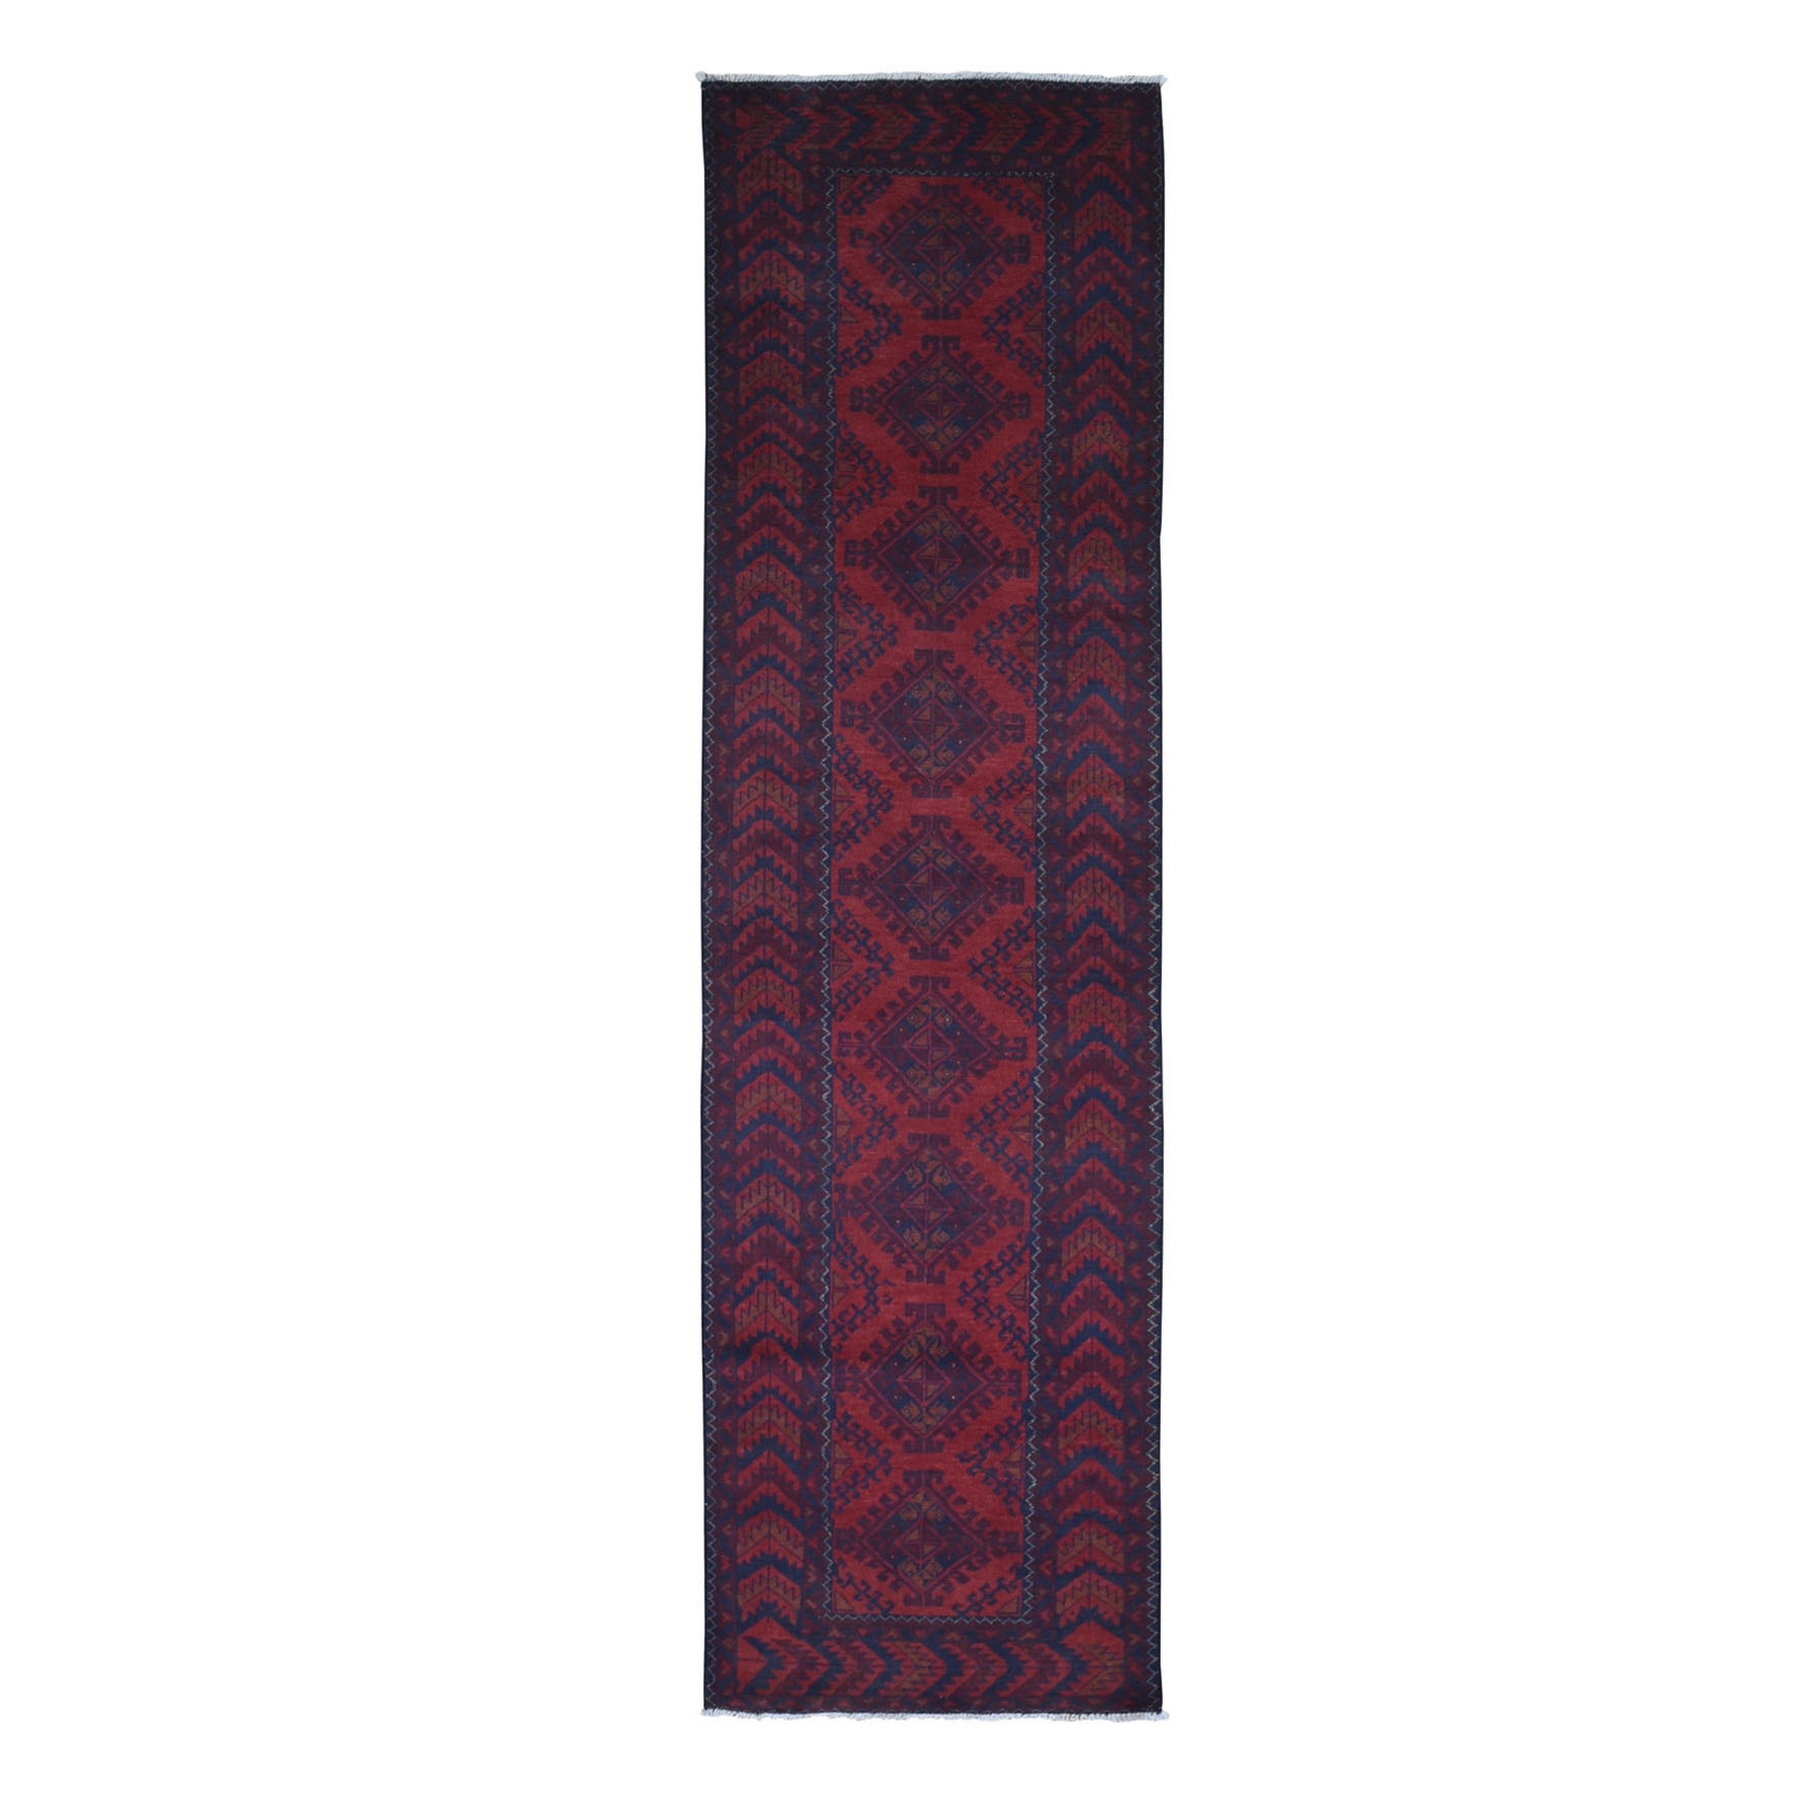 Nomadic And Village Collection Hand Knotted Red Rug No: 1133324